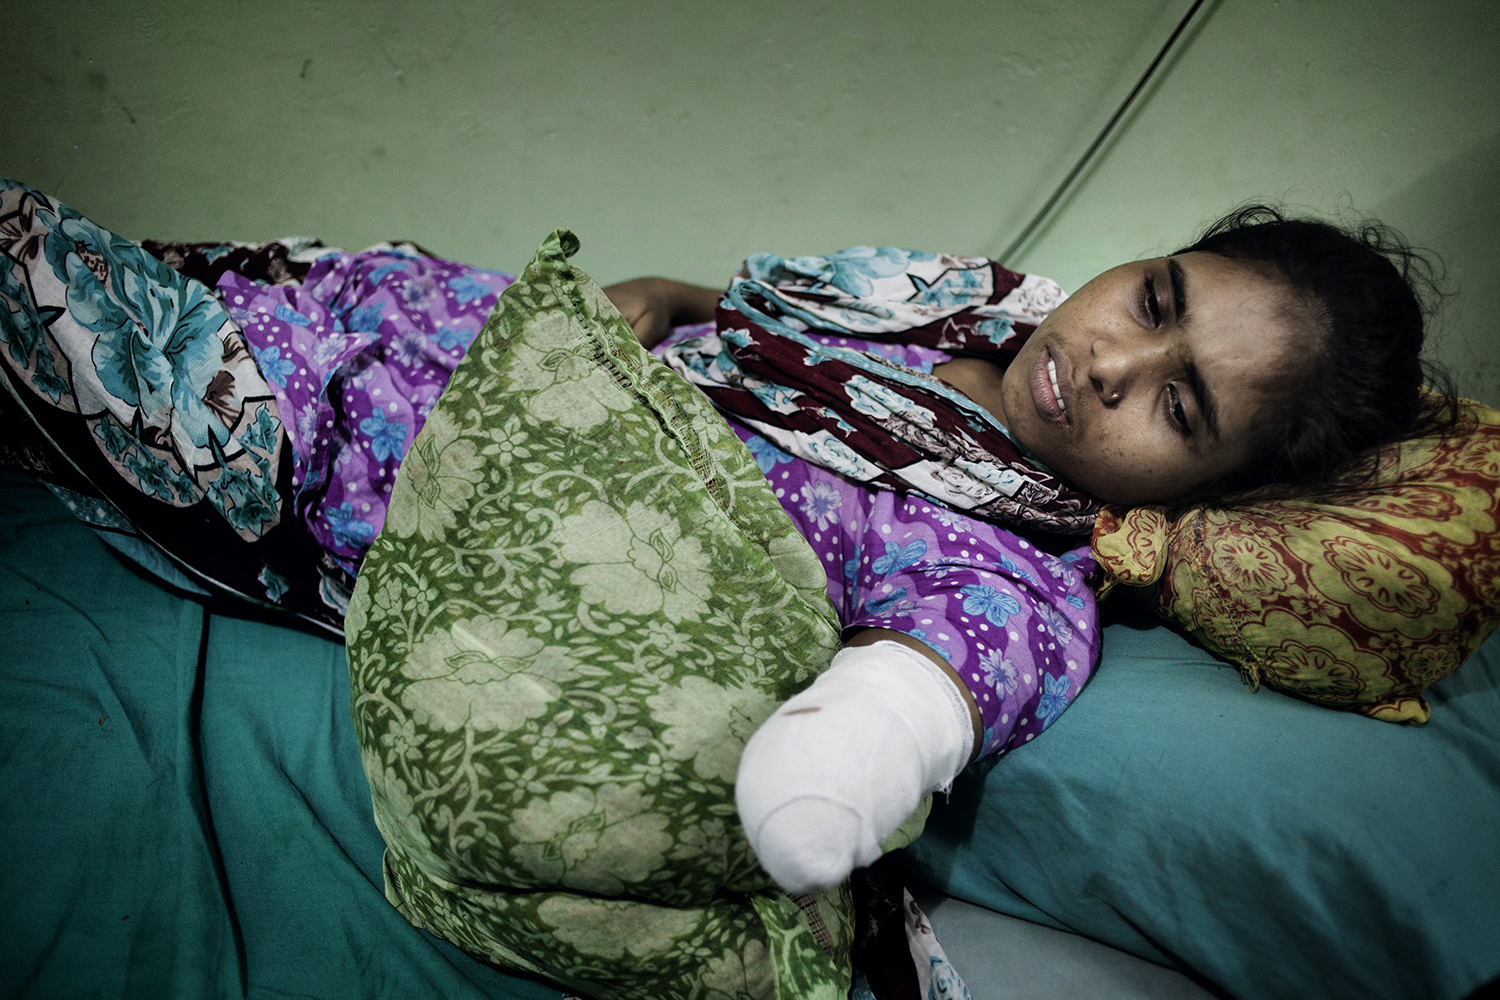 Rojina (25) lost her hand under the rubble. To save her own self Rojina first started cutting her hand. Rojina and her sister Morjina both were worker . Morjina is missing and. Rojina is alive. Rana Plaza, the 8- stored building where 5 garments factory was running, has collapsed on 24th April 2013 and 1131 workers dead so far Savar, Dhaka, Bangladesh.14th June 20139. Savar, Dhaka, Bangladesh.14th June 2013